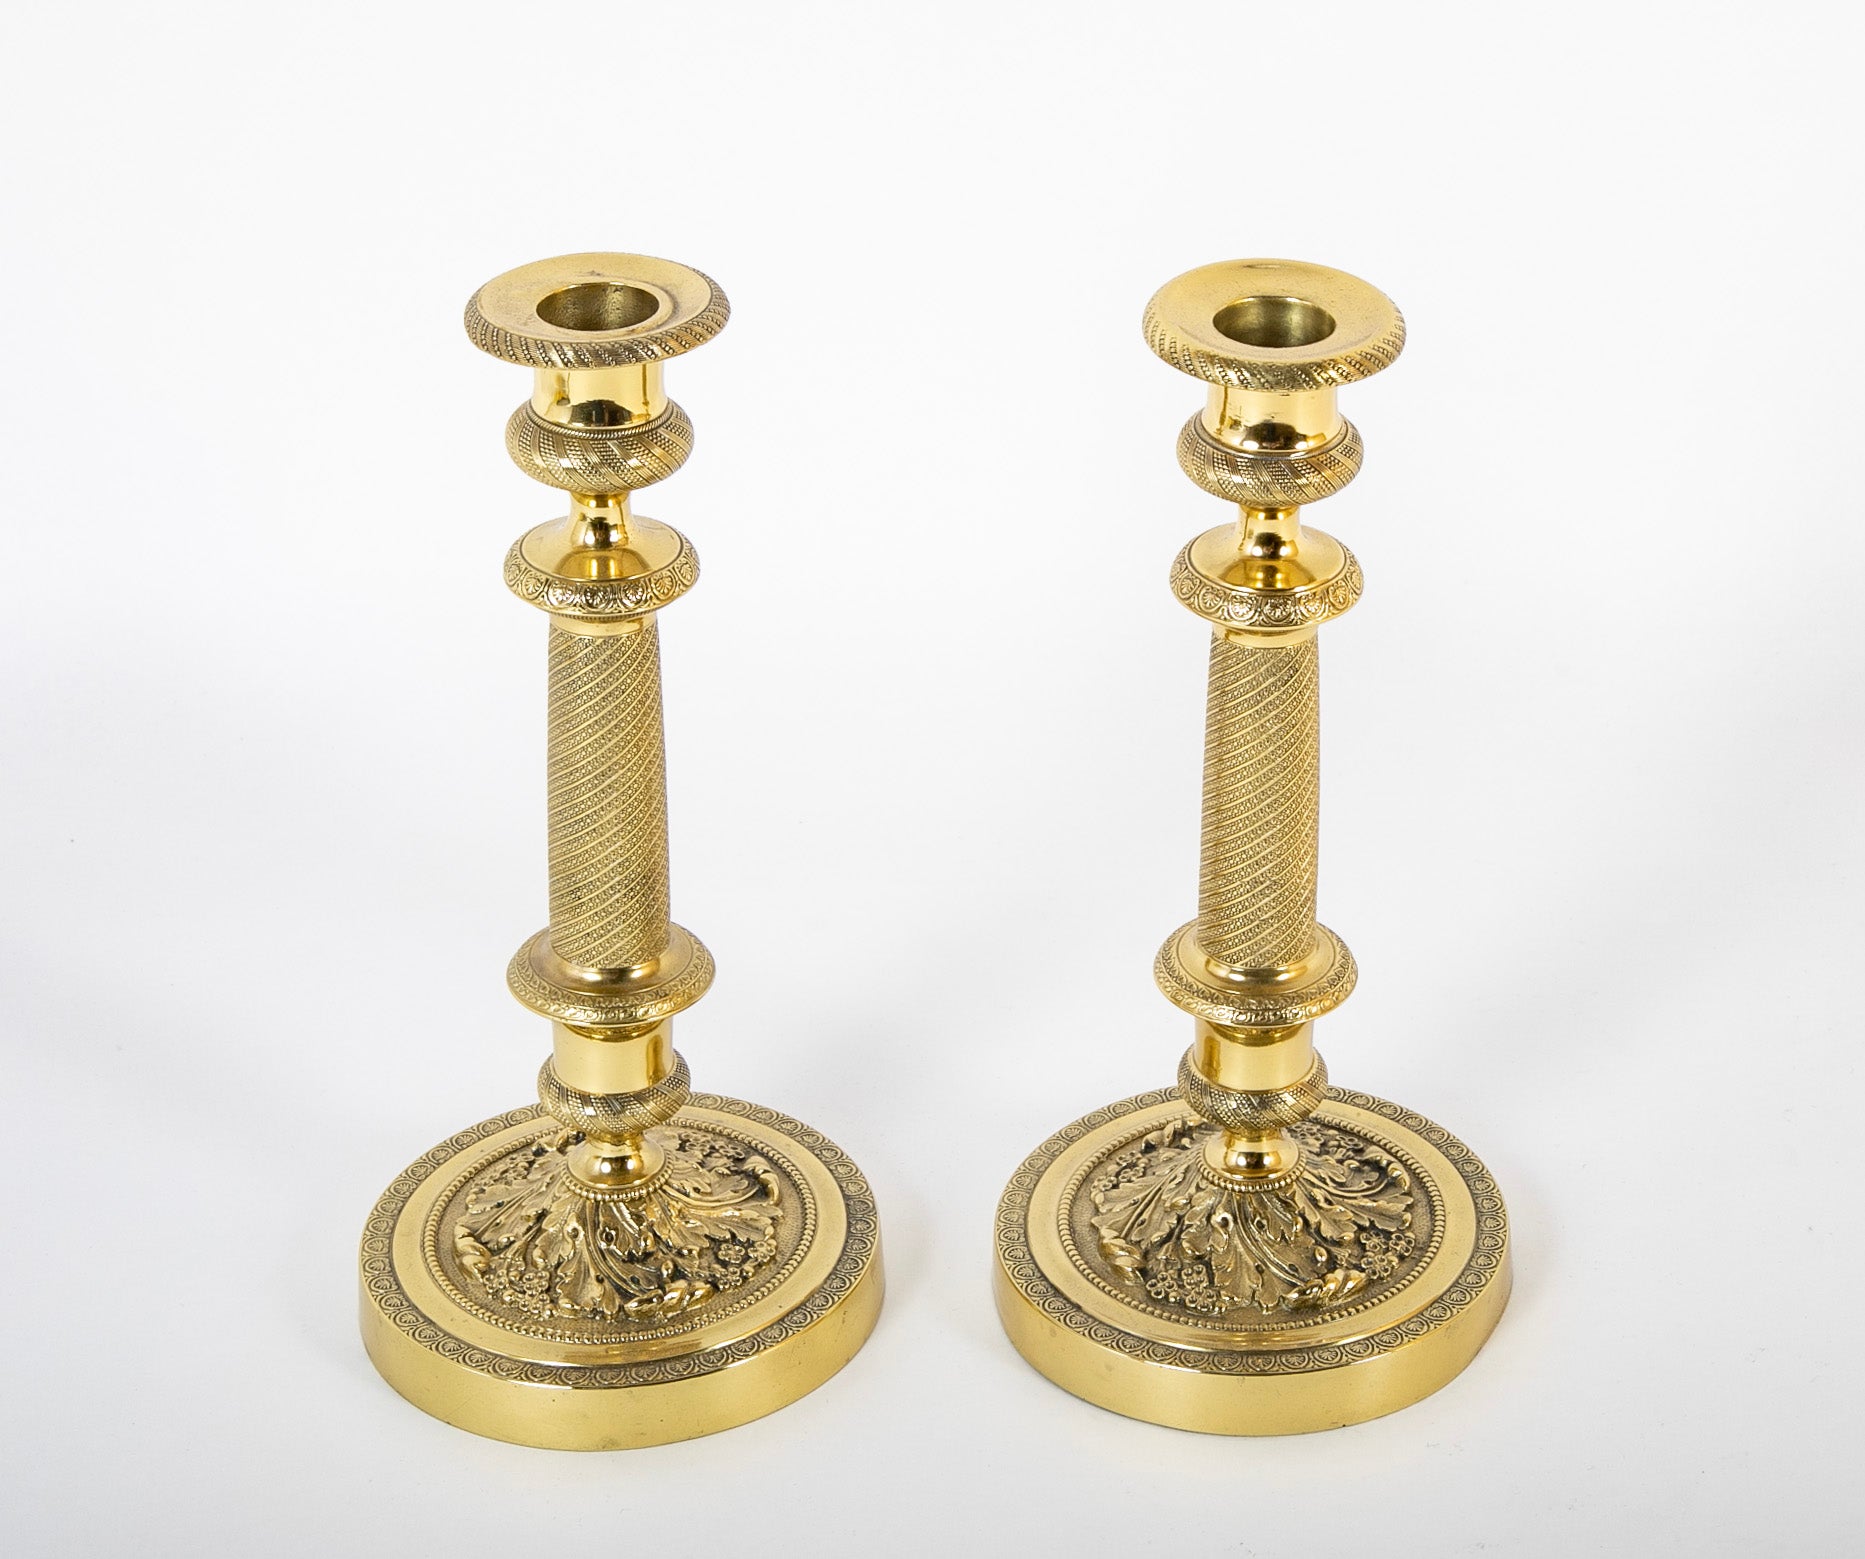 Pair of French Restauration Brass Candlesticks with Swirled